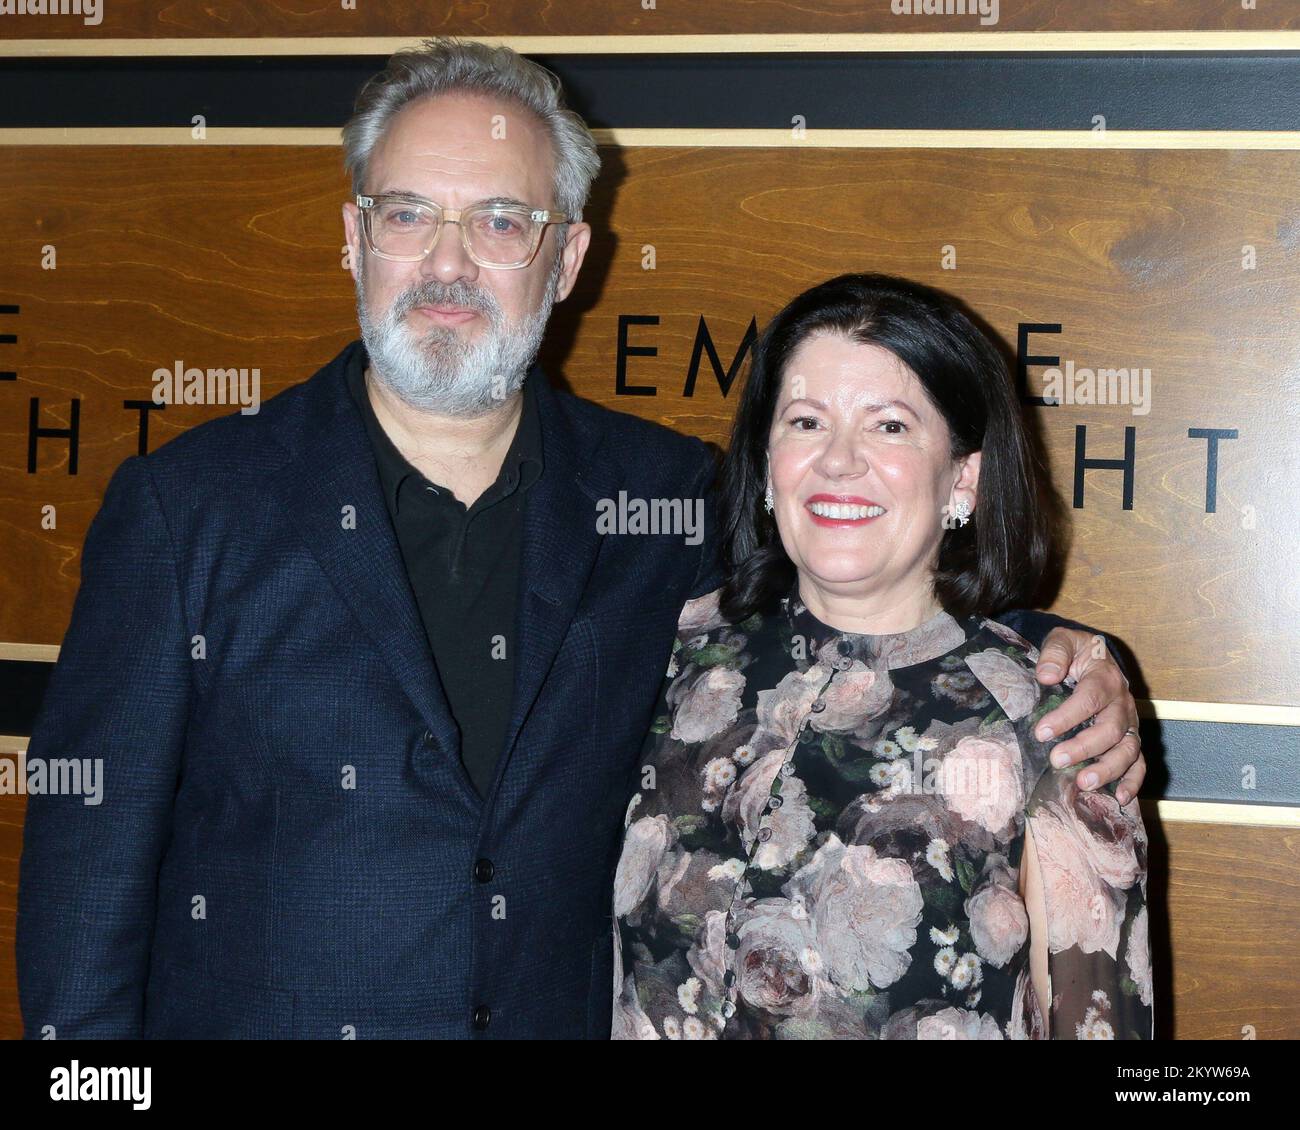 Beverly Hills, CA. 1st Dec, 2022. Sam Mendes, Pippa Harris at arrivals for EMPIRE OF LIGHT Premiere, Samuel Goldwyn Theater, Beverly Hills, CA December 1, 2022. Credit: Priscilla Grant/Everett Collection/Alamy Live News Stock Photo